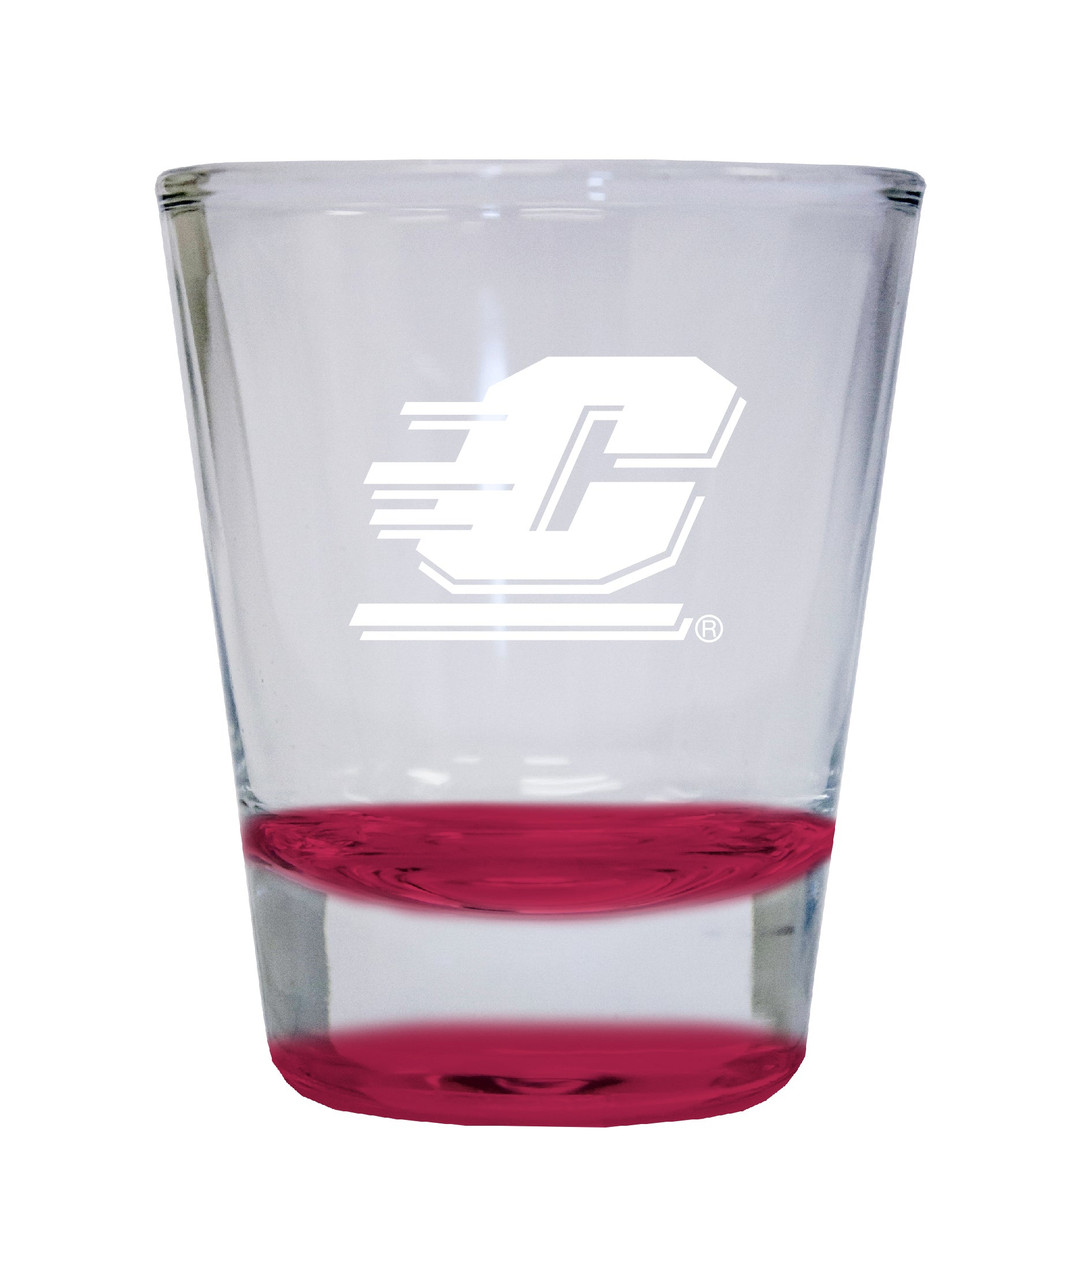 Central Michigan University Etched Round Shot Glass 2 oz Red